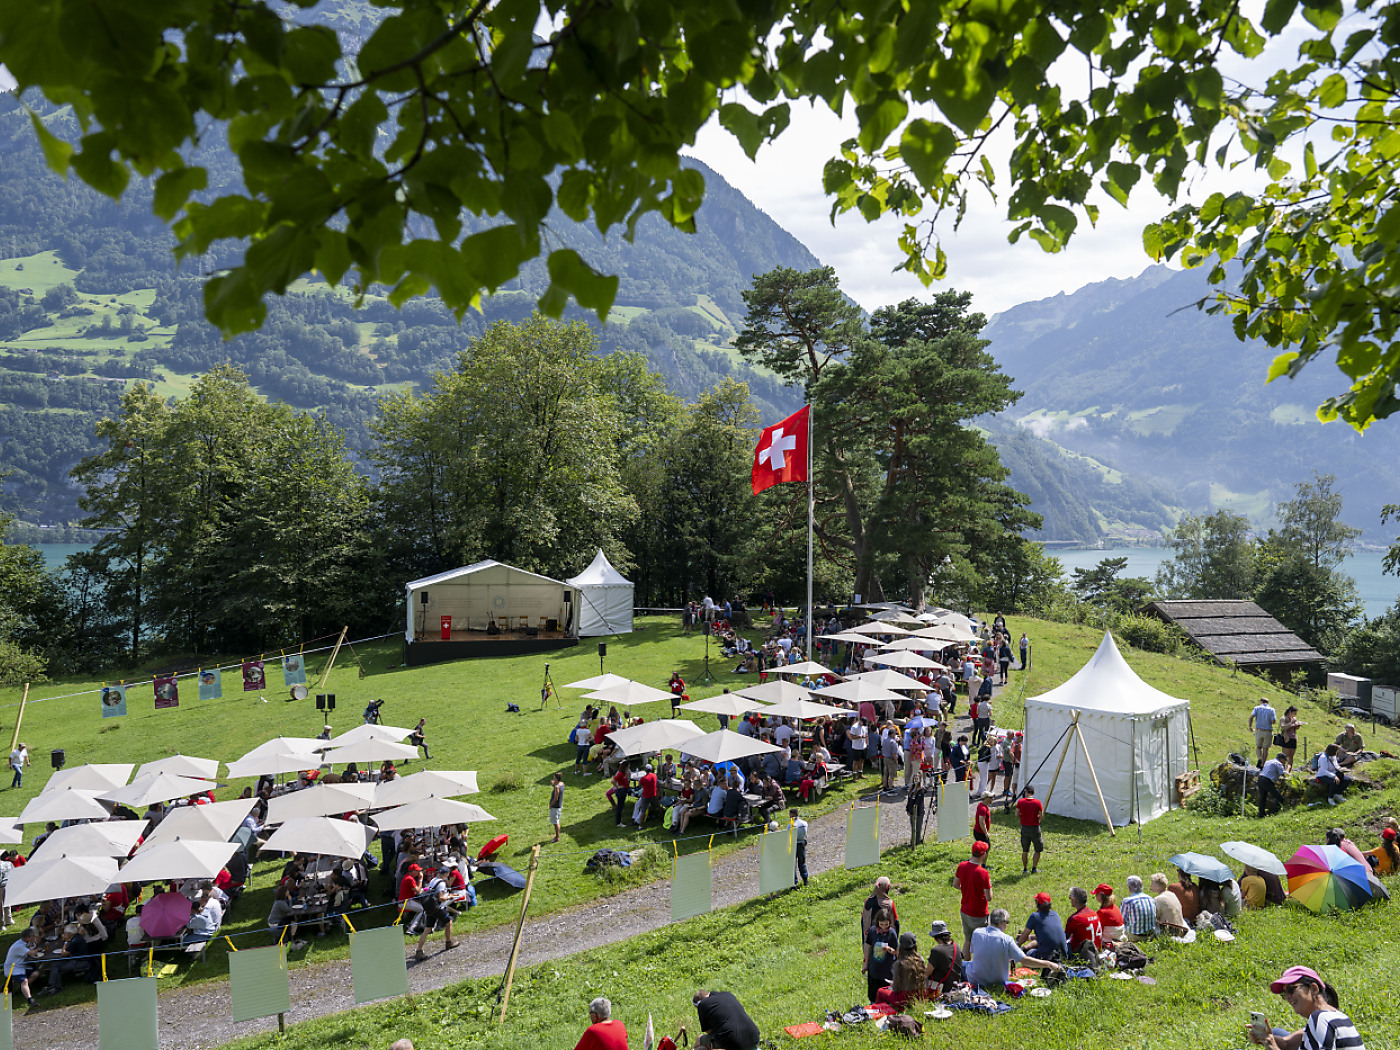 Town and country united at the Rütli to celebrate the Swiss Confederation